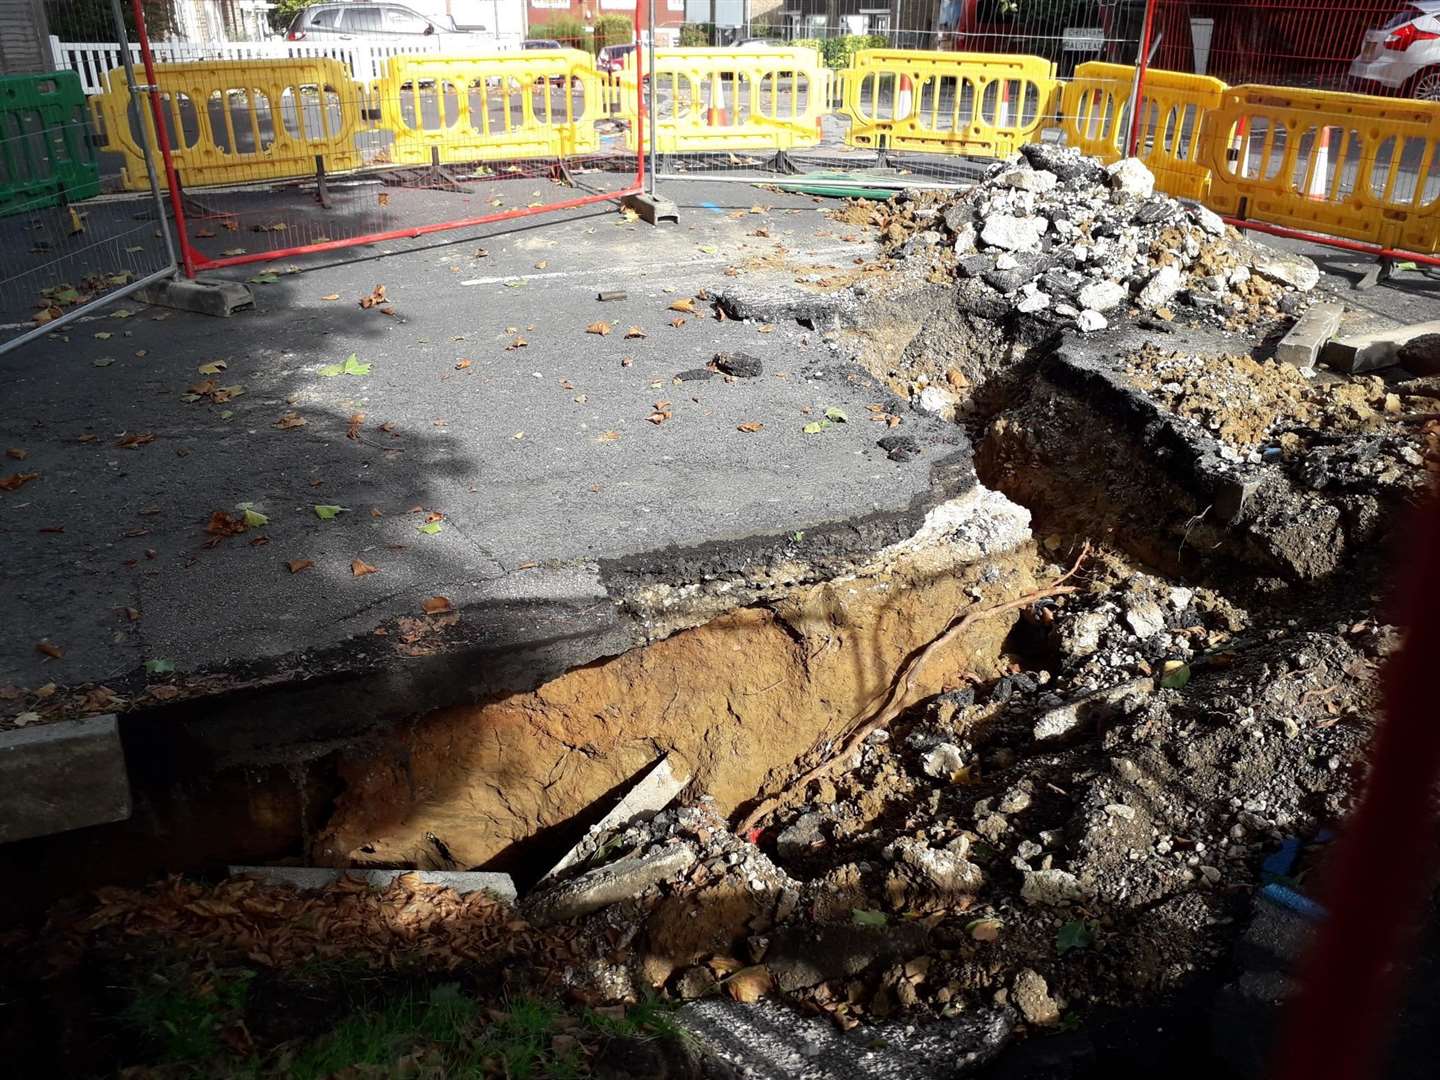 The sinkhole has forced Hildenborough Crescent to close. Picture: Helen Kelly (59762029)